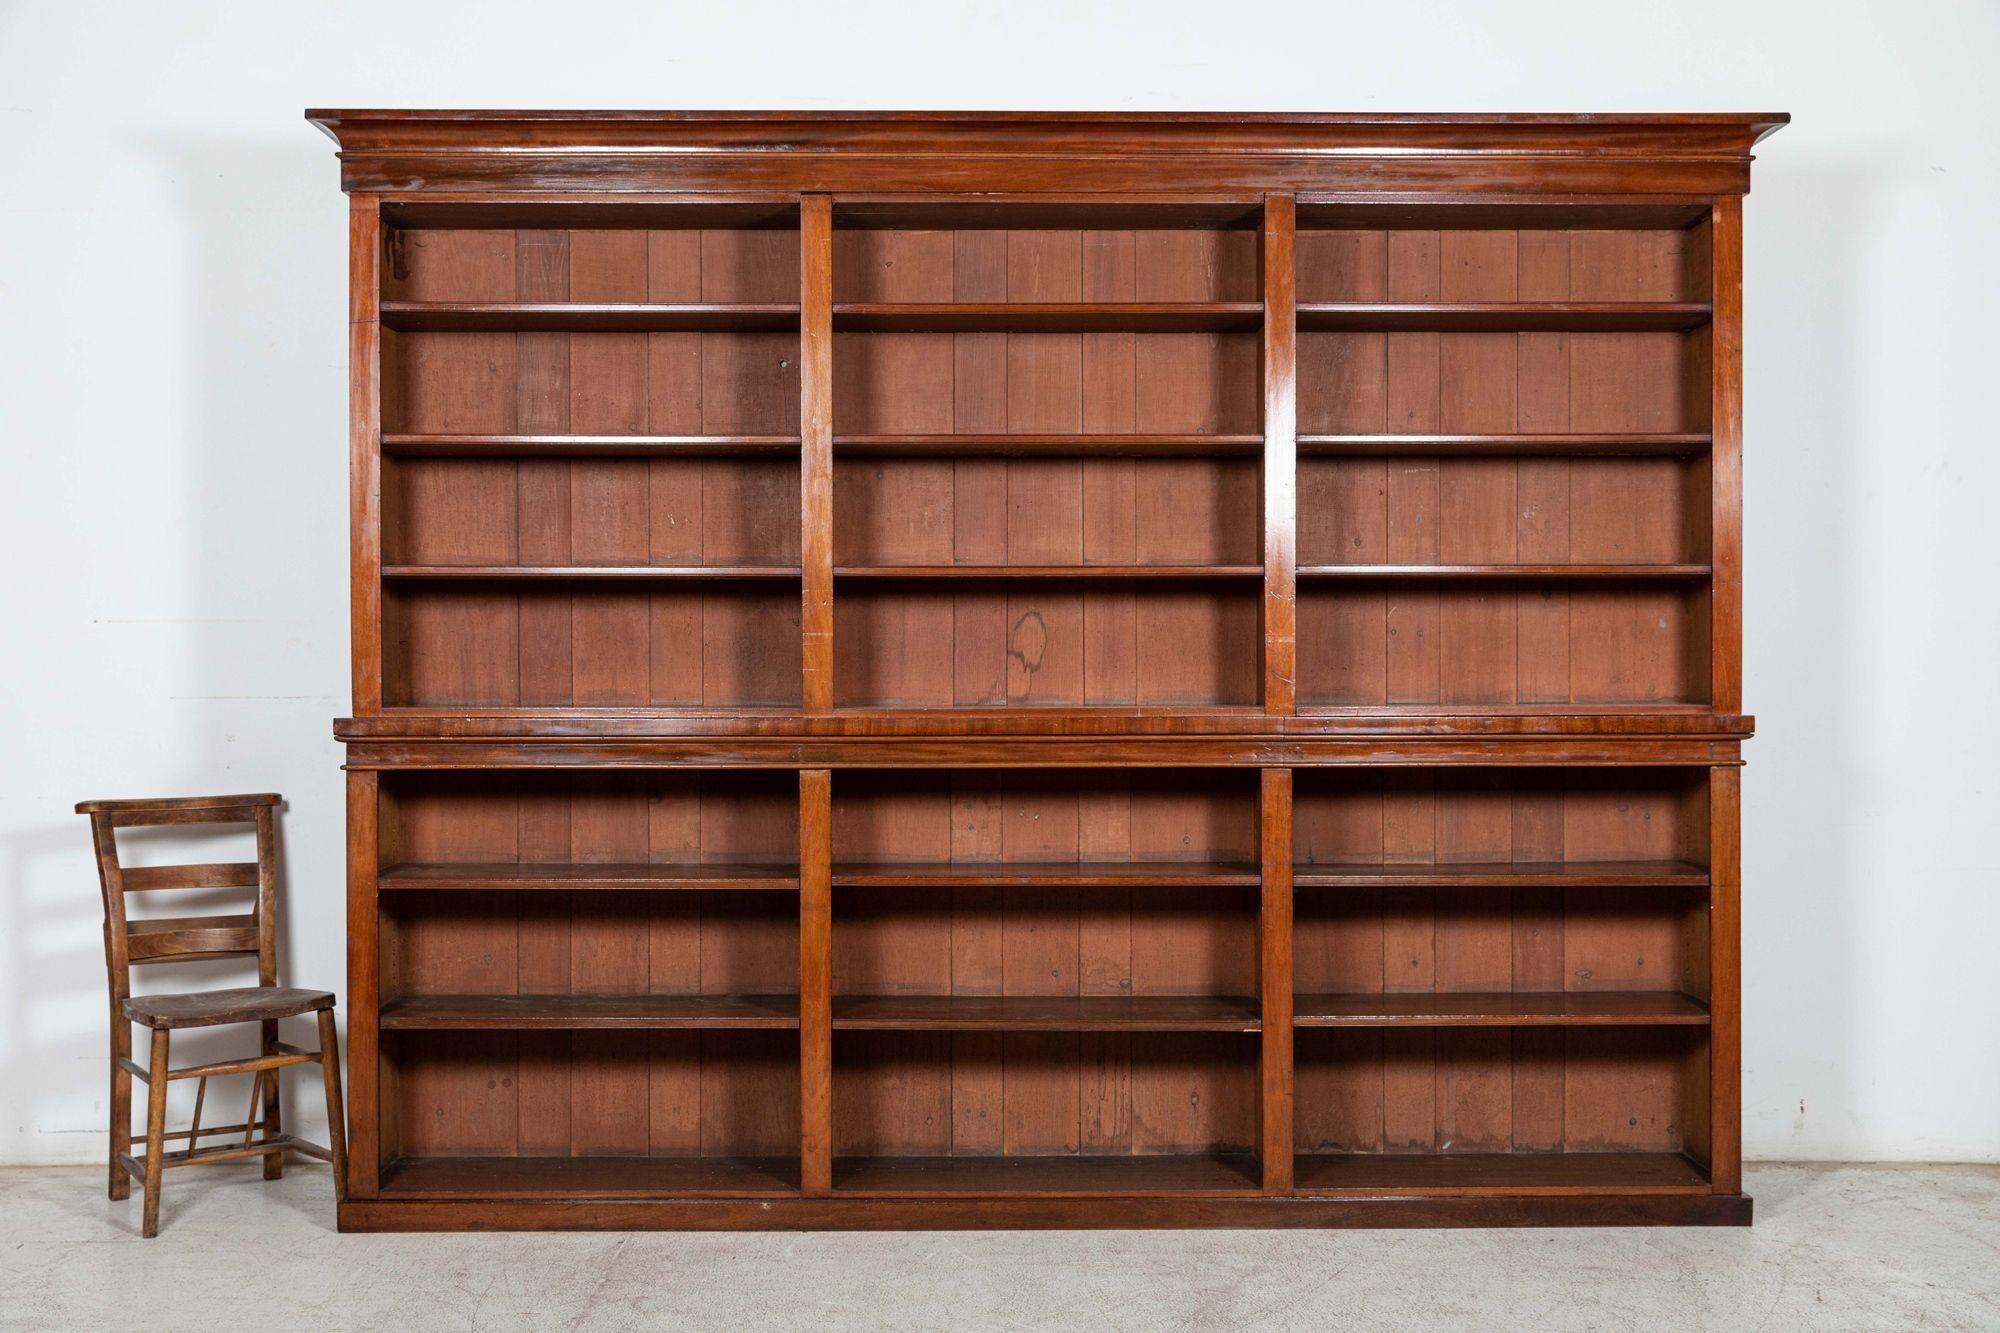 Circa 1870
19thC monumental English mahogany open library bookcase
Adjustable base shelves with excellent colour, scale and form
(2 parts, top and base)
Measures: W 287 x D 38 x H 218 cm
Base W 277 x D 35 x H 100 cm
Top W 287 x D 38 x H 118